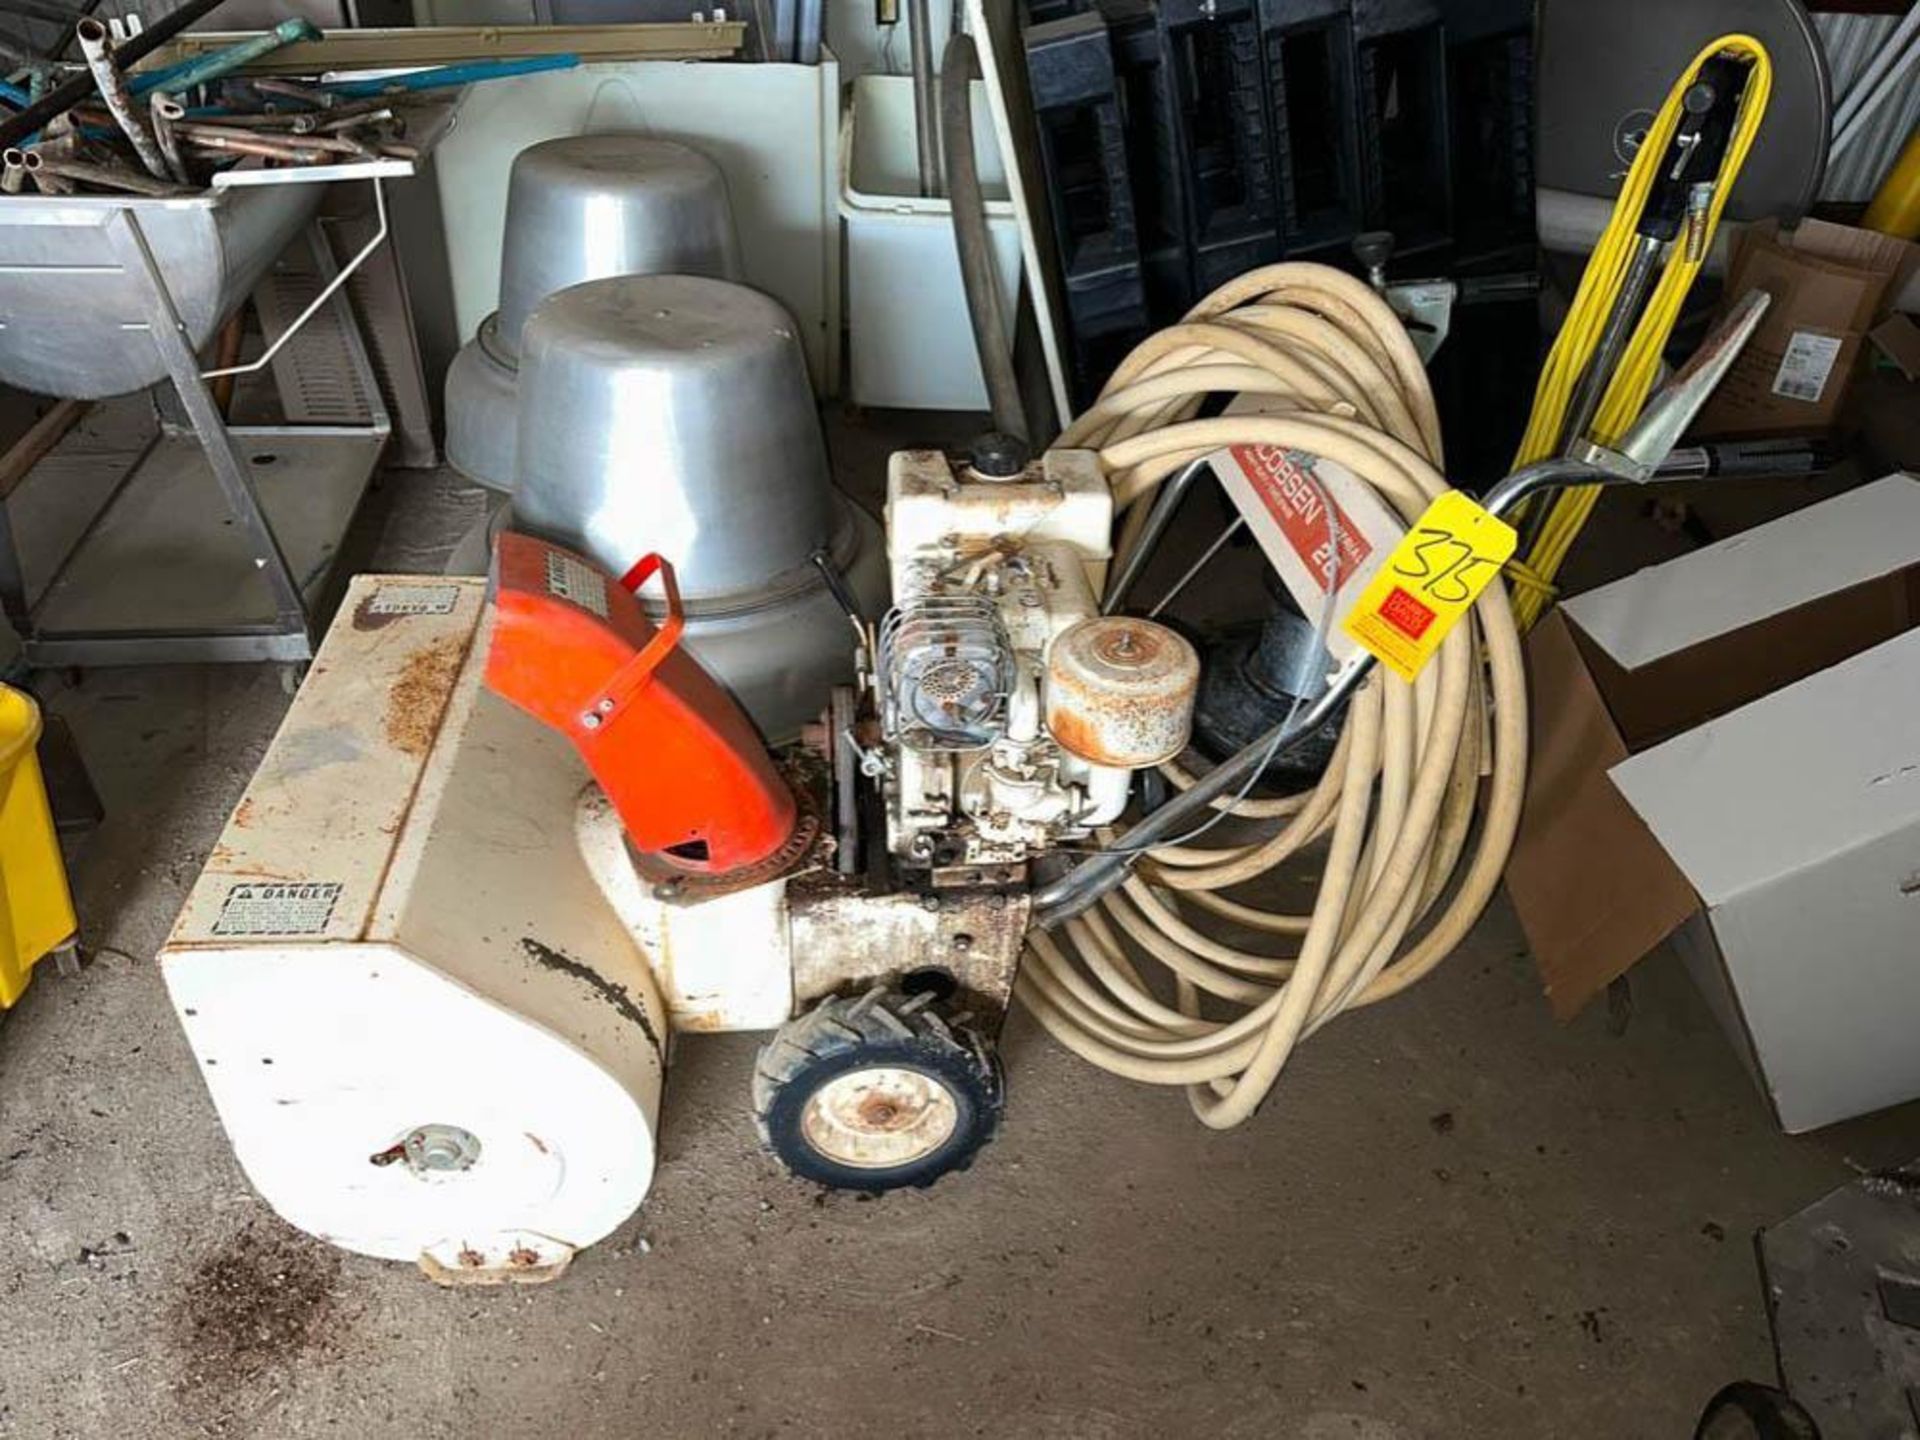 Jacobsen Imperial 26 Snow Blower - Rigging Fee: $50